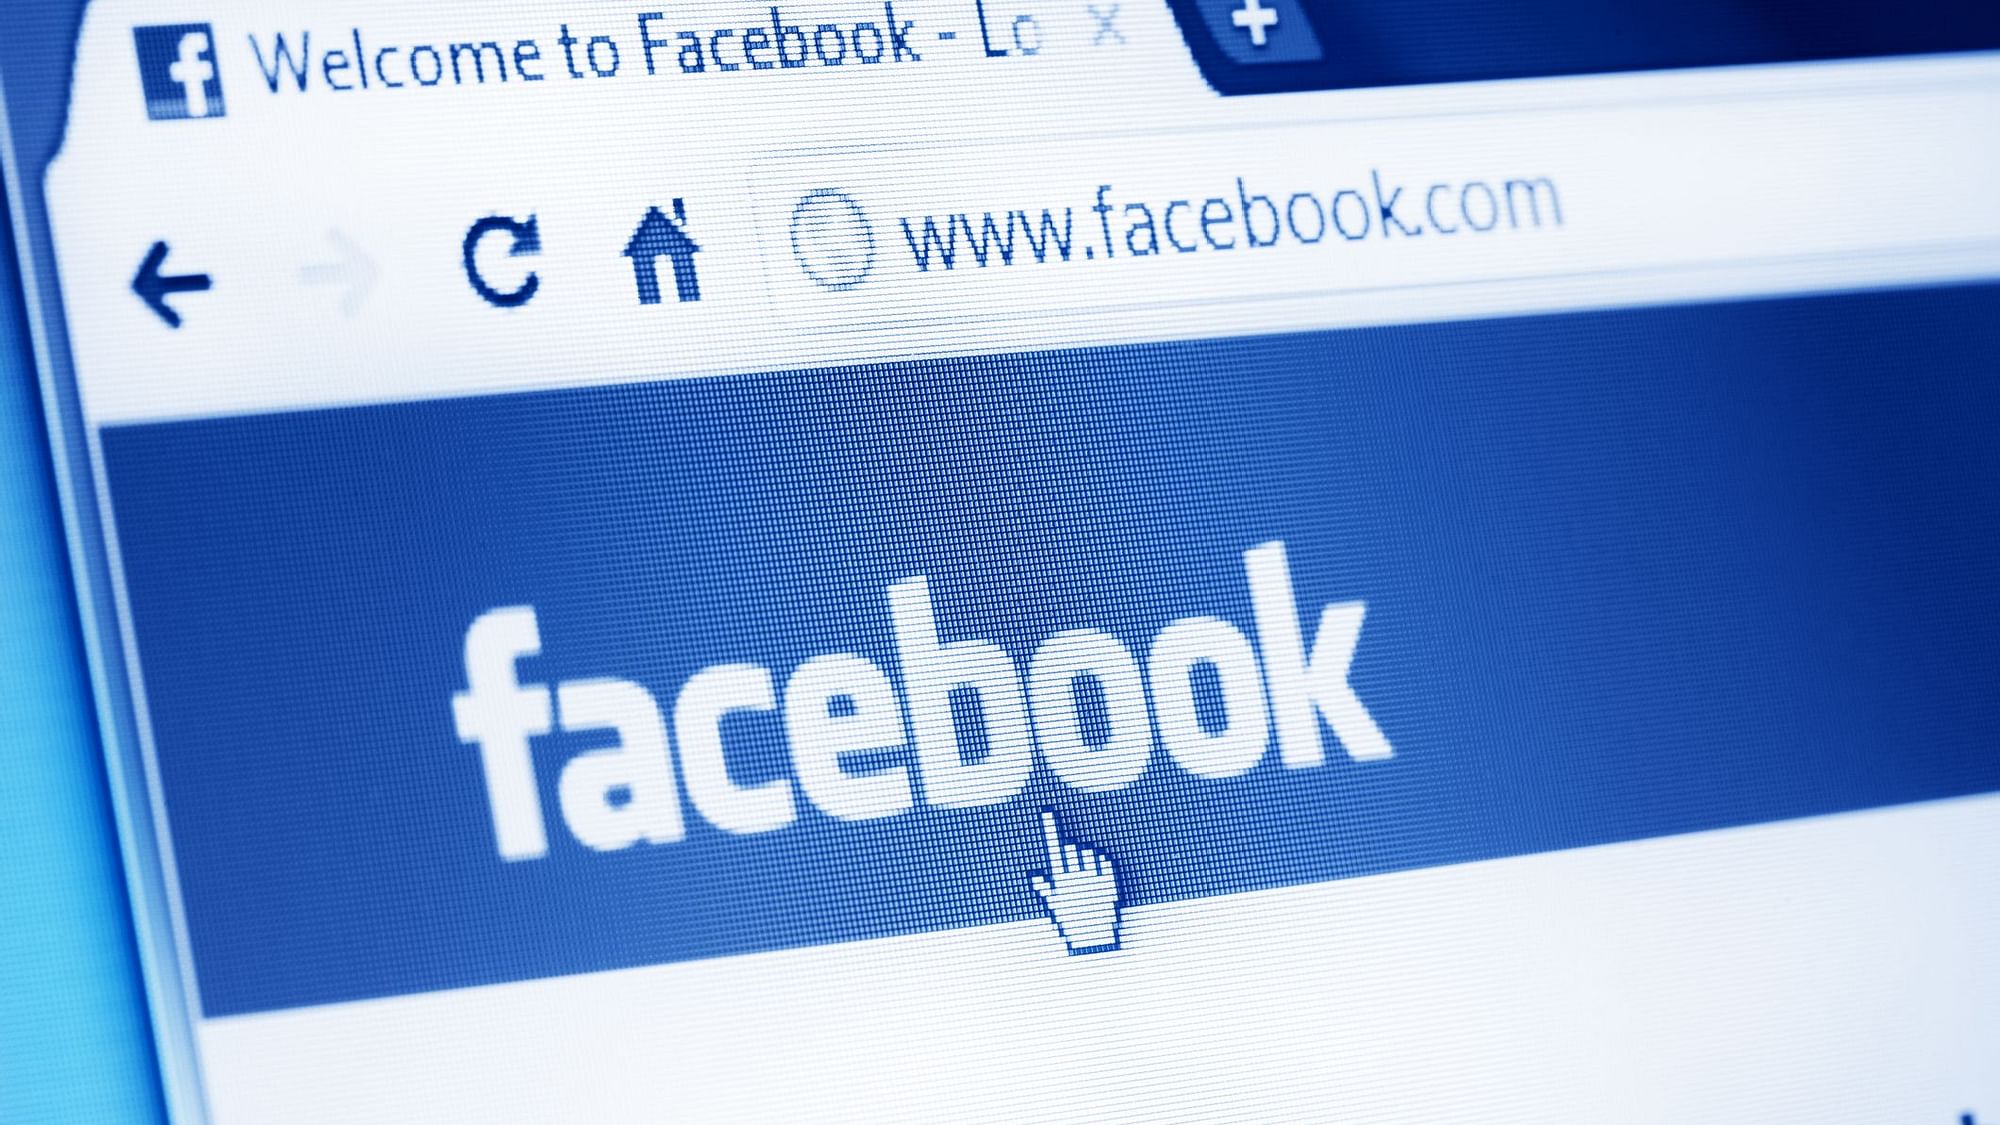 Facebook has confirmed and said it will no longer continue the practice, following scrutiny into other companies.